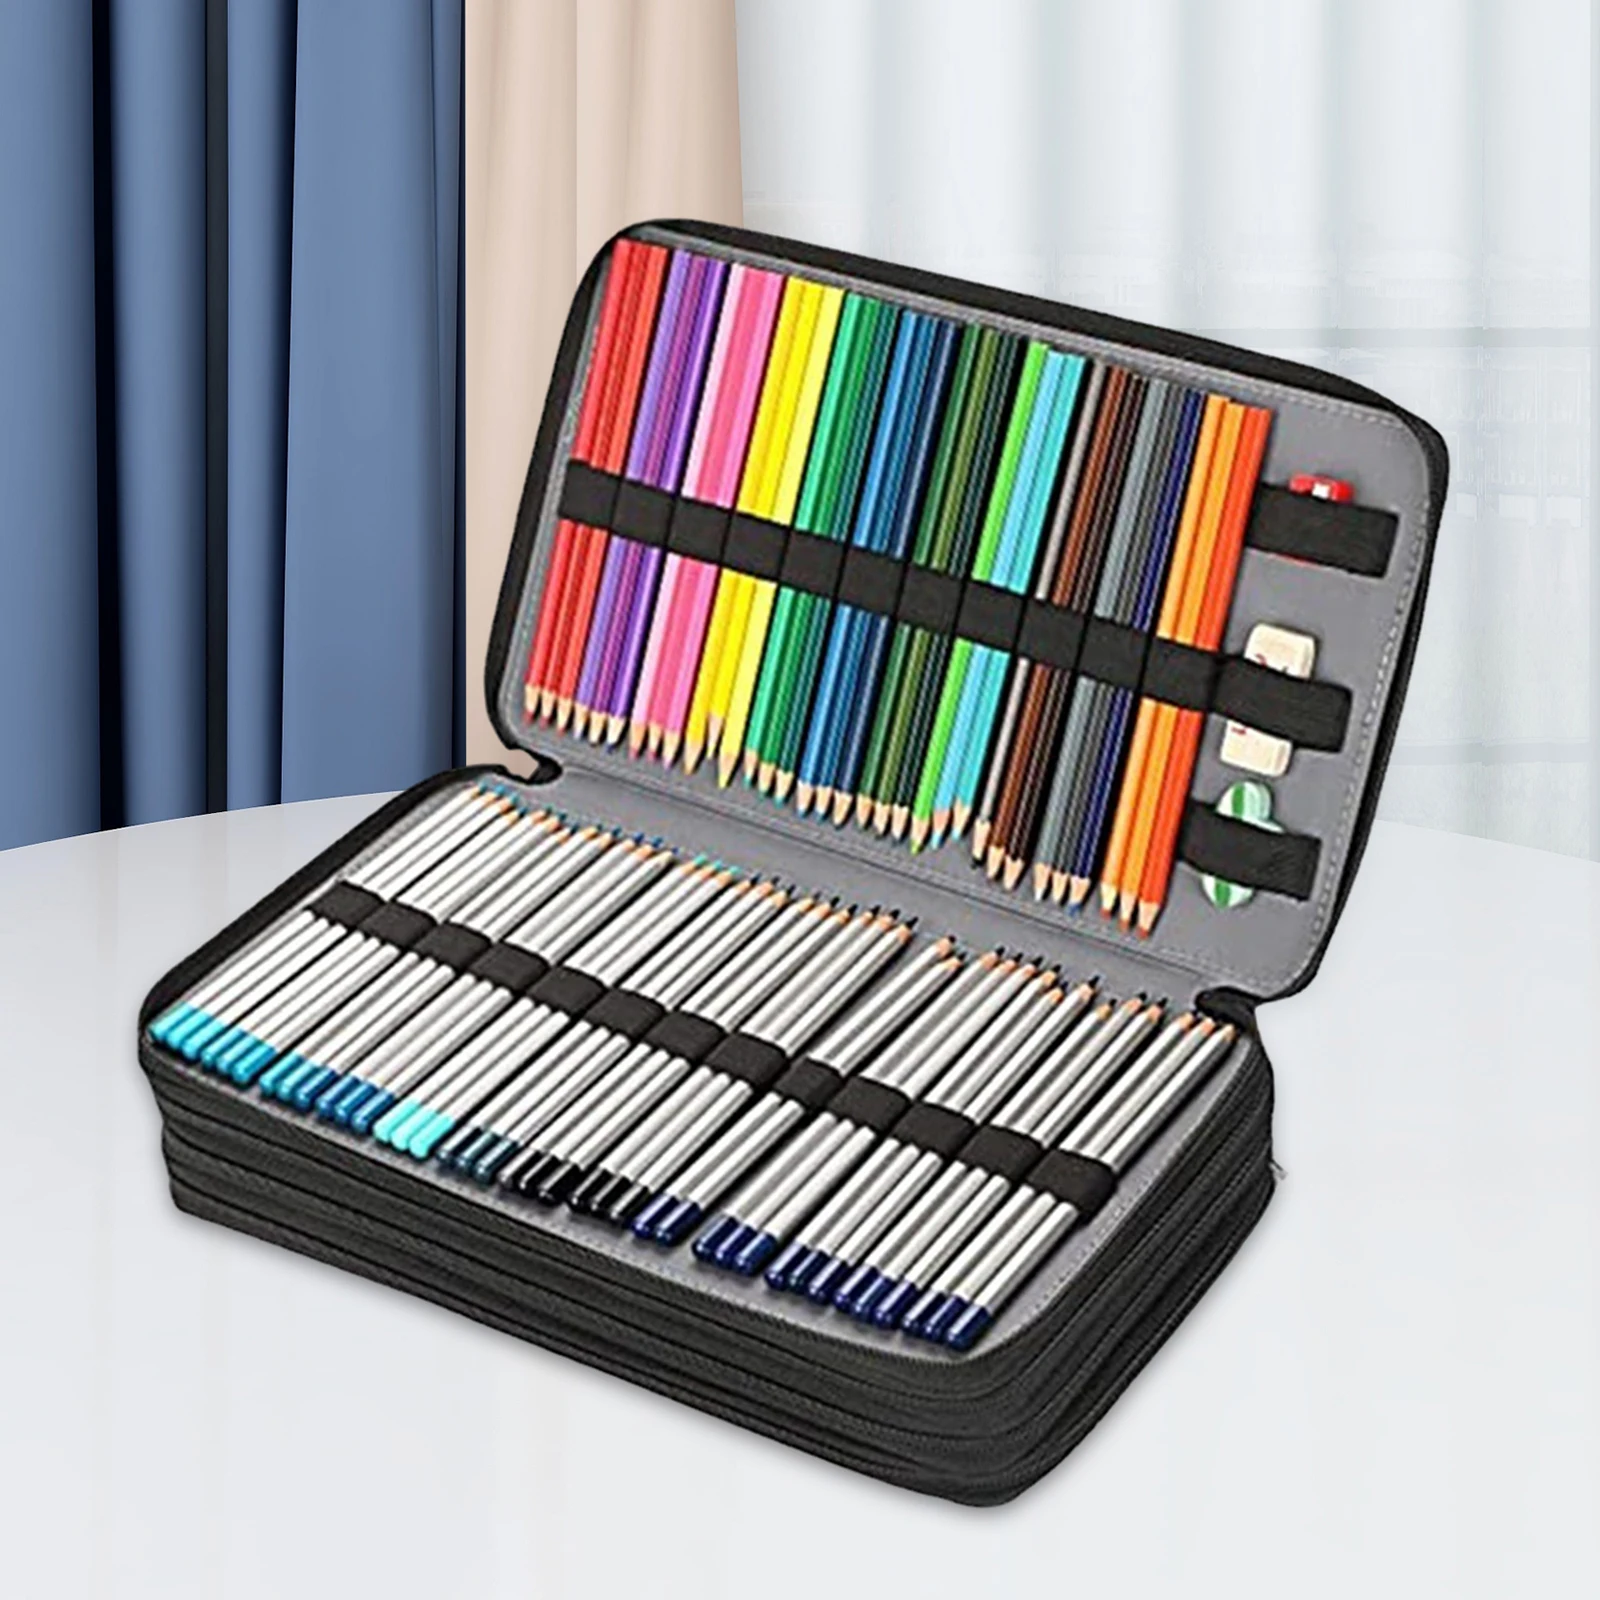 Large Capacity 300 Slots Colored Pencil Organizer Colouring Pencils Organizer Zipper 4 Layers for Makeup Brushes Stationery